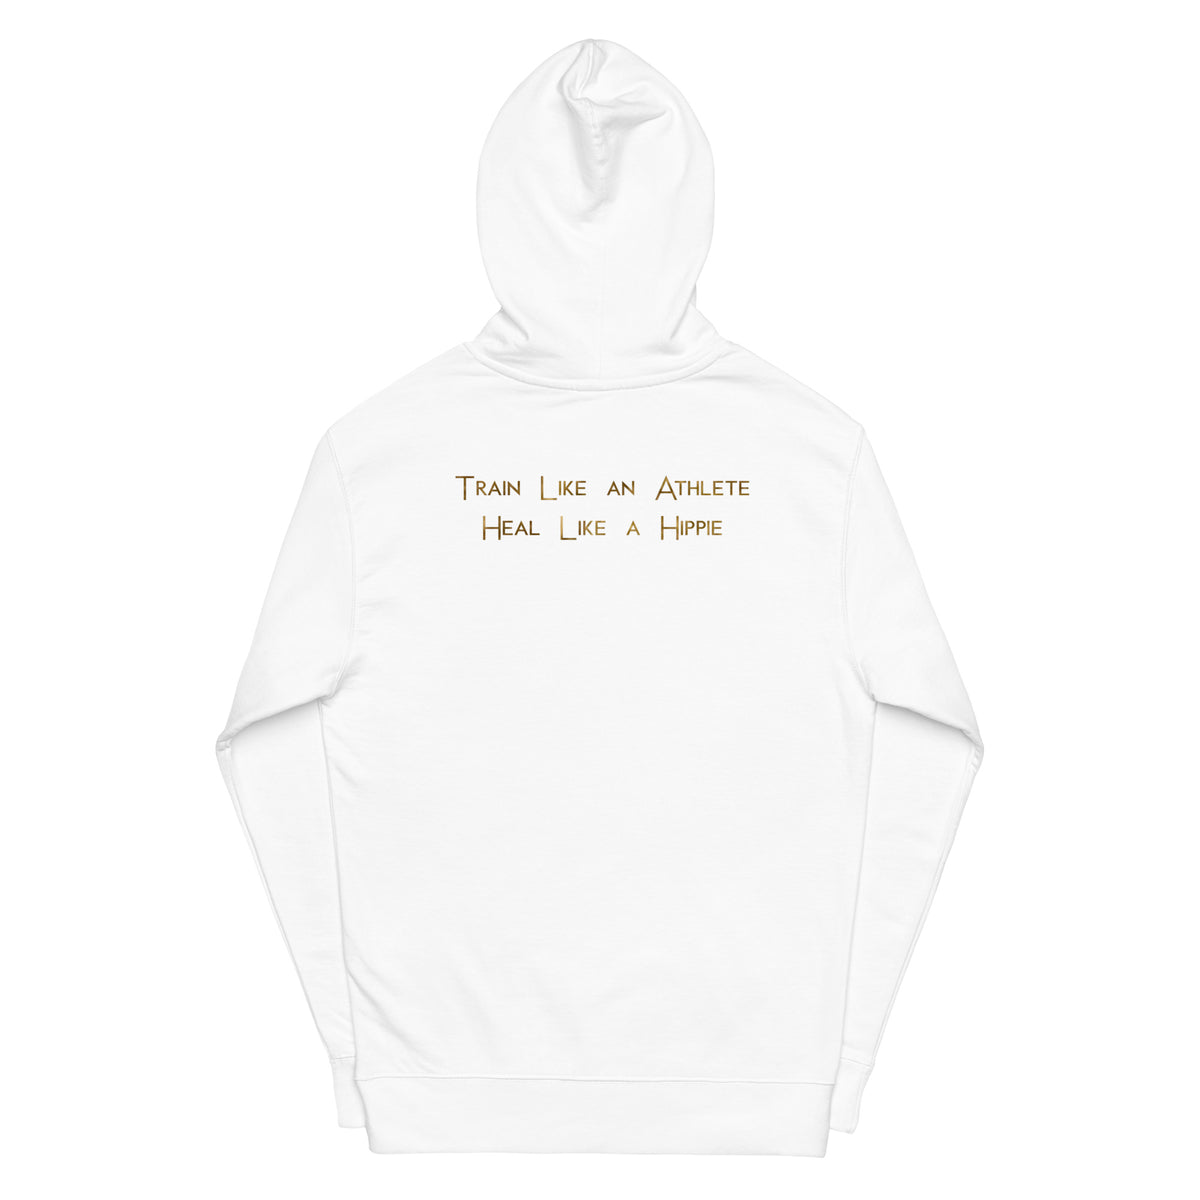 Athlete Wellness and Performance Midweight Hoodie - Heal Like a Hippie